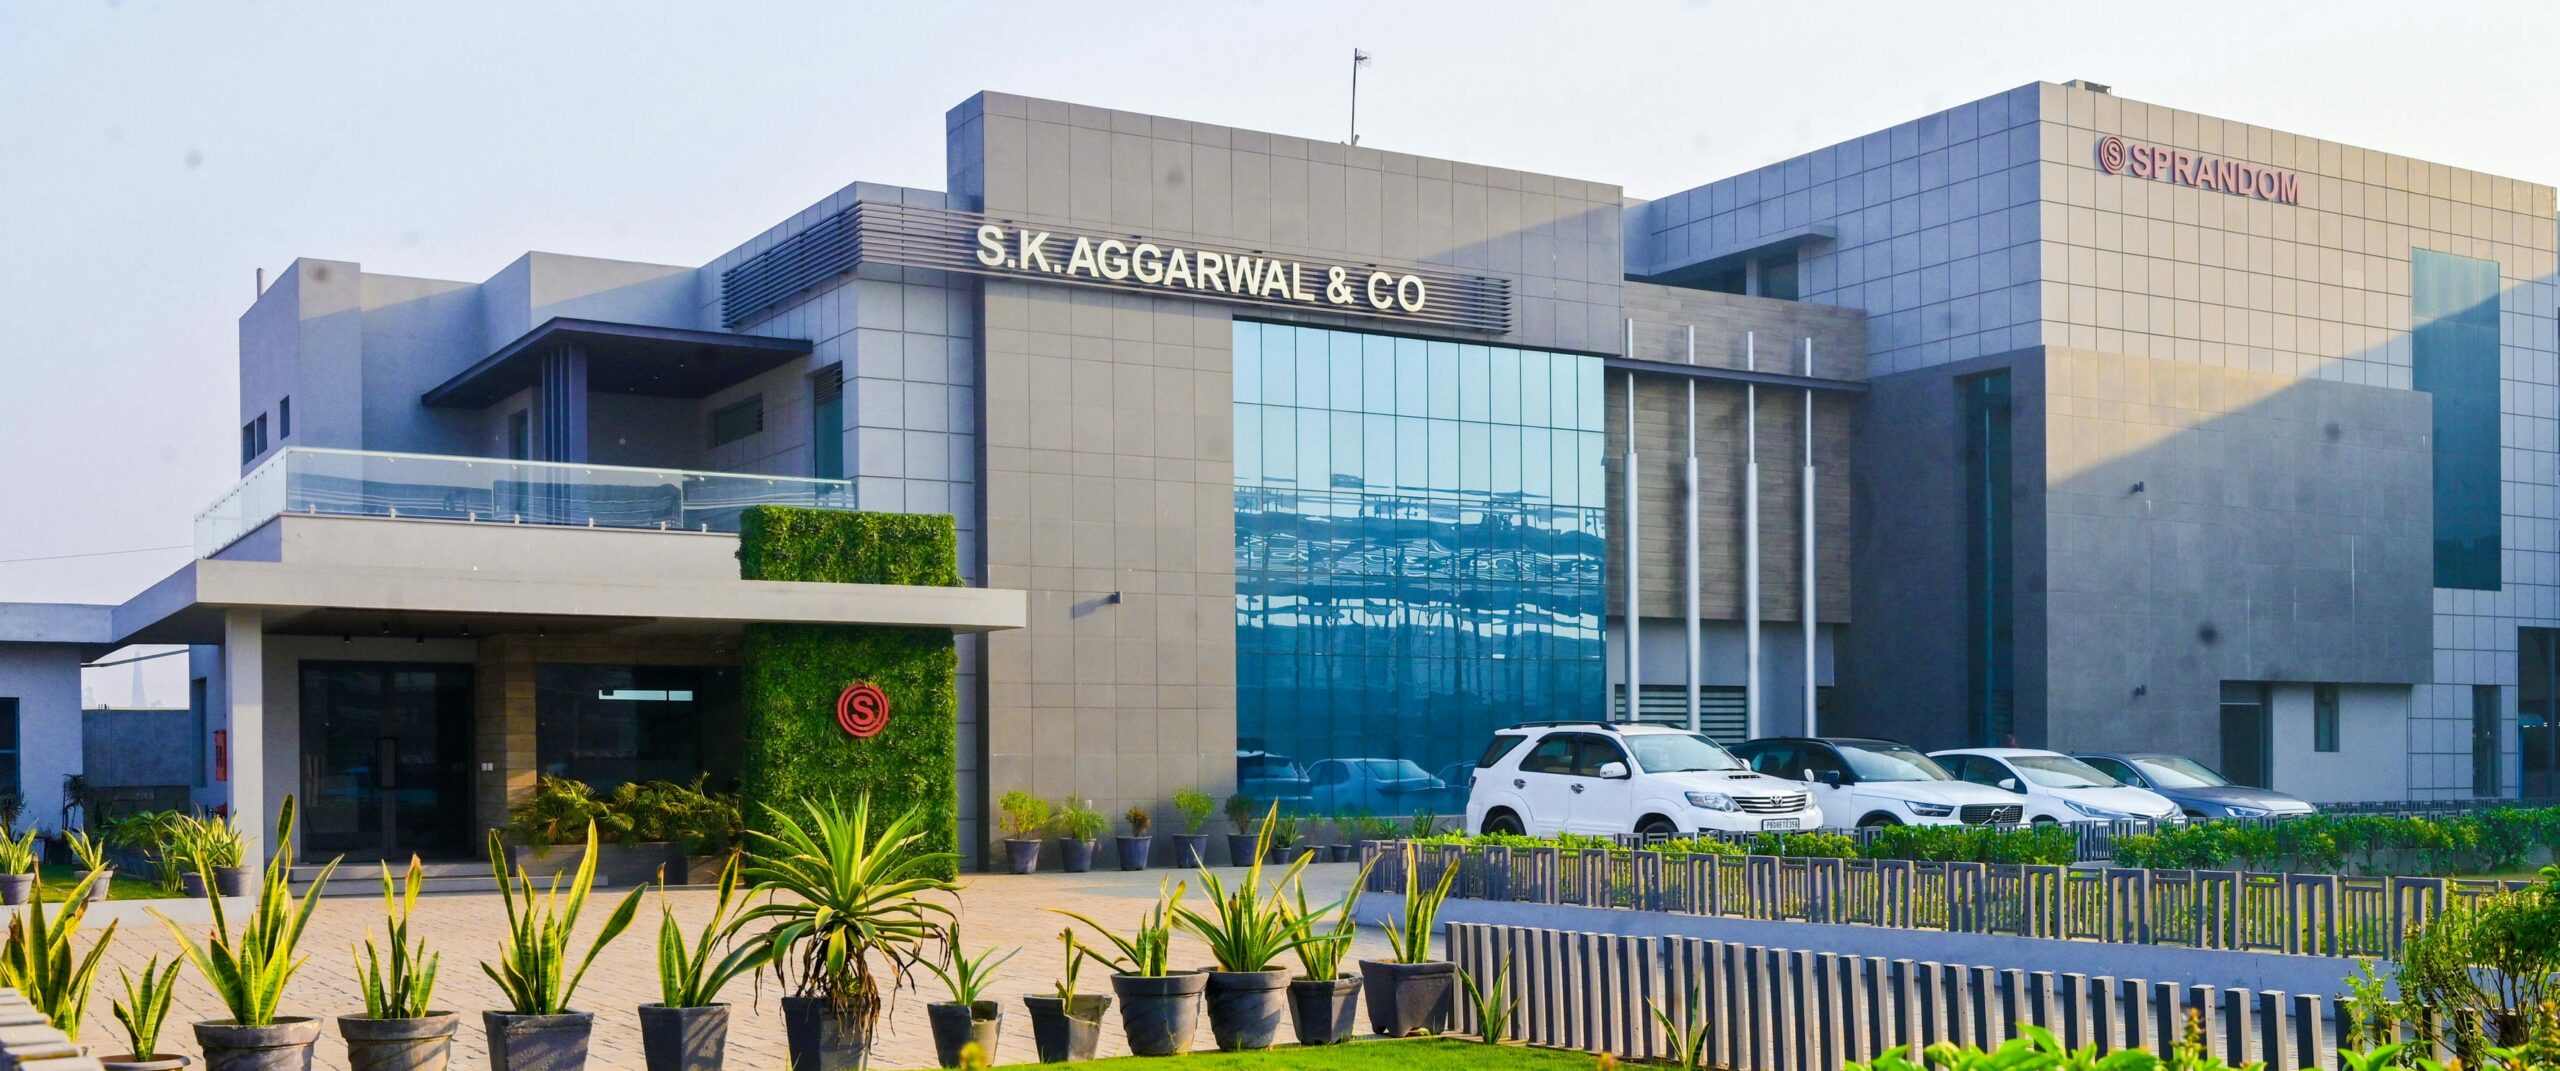 S.K. Aggarwal Co. Main Office Building